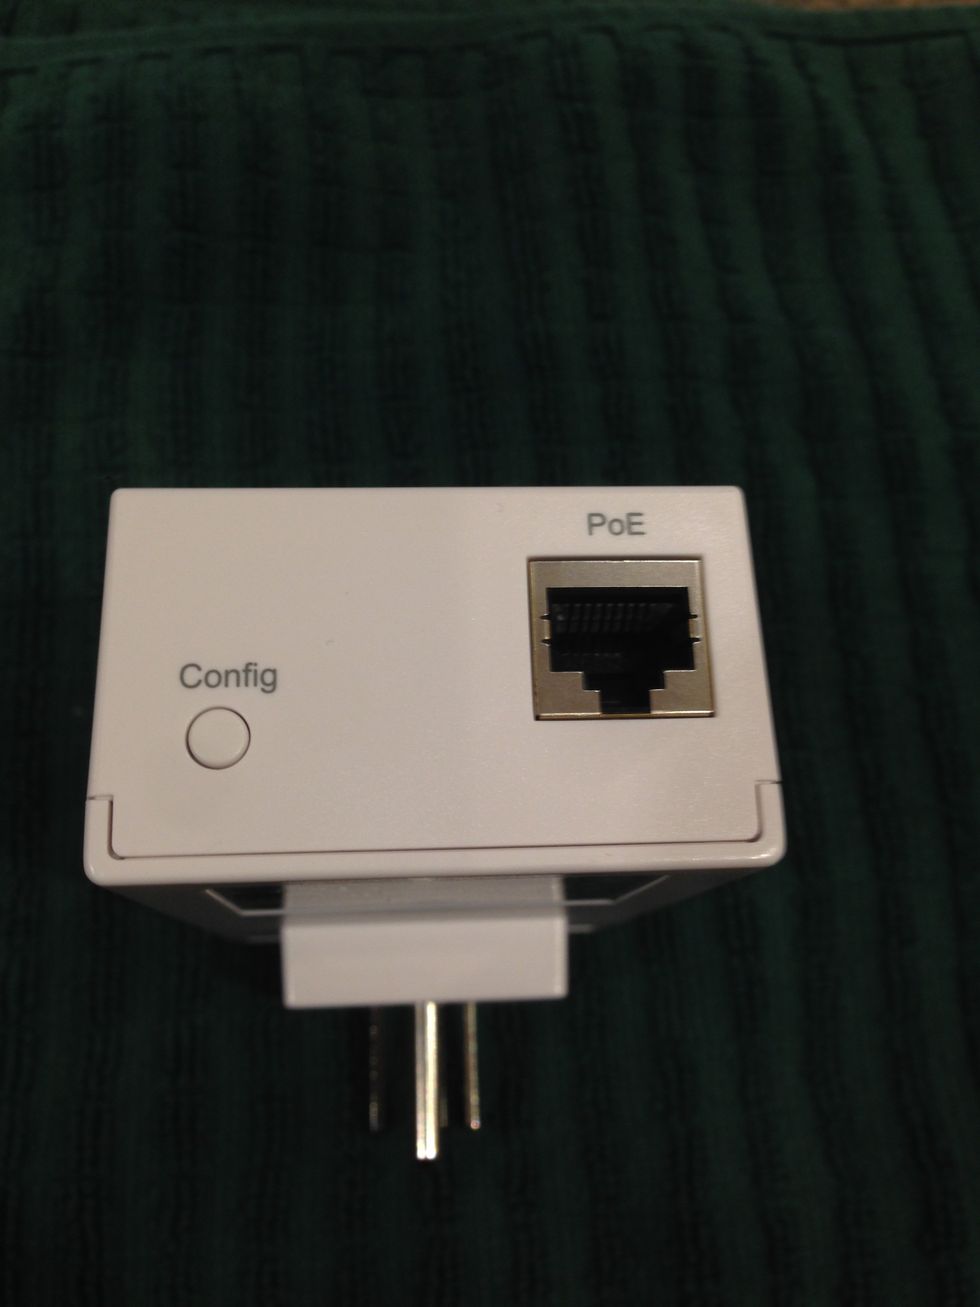 Vivint powerline converter or PLC used to send wireless signal over your electrical wires.